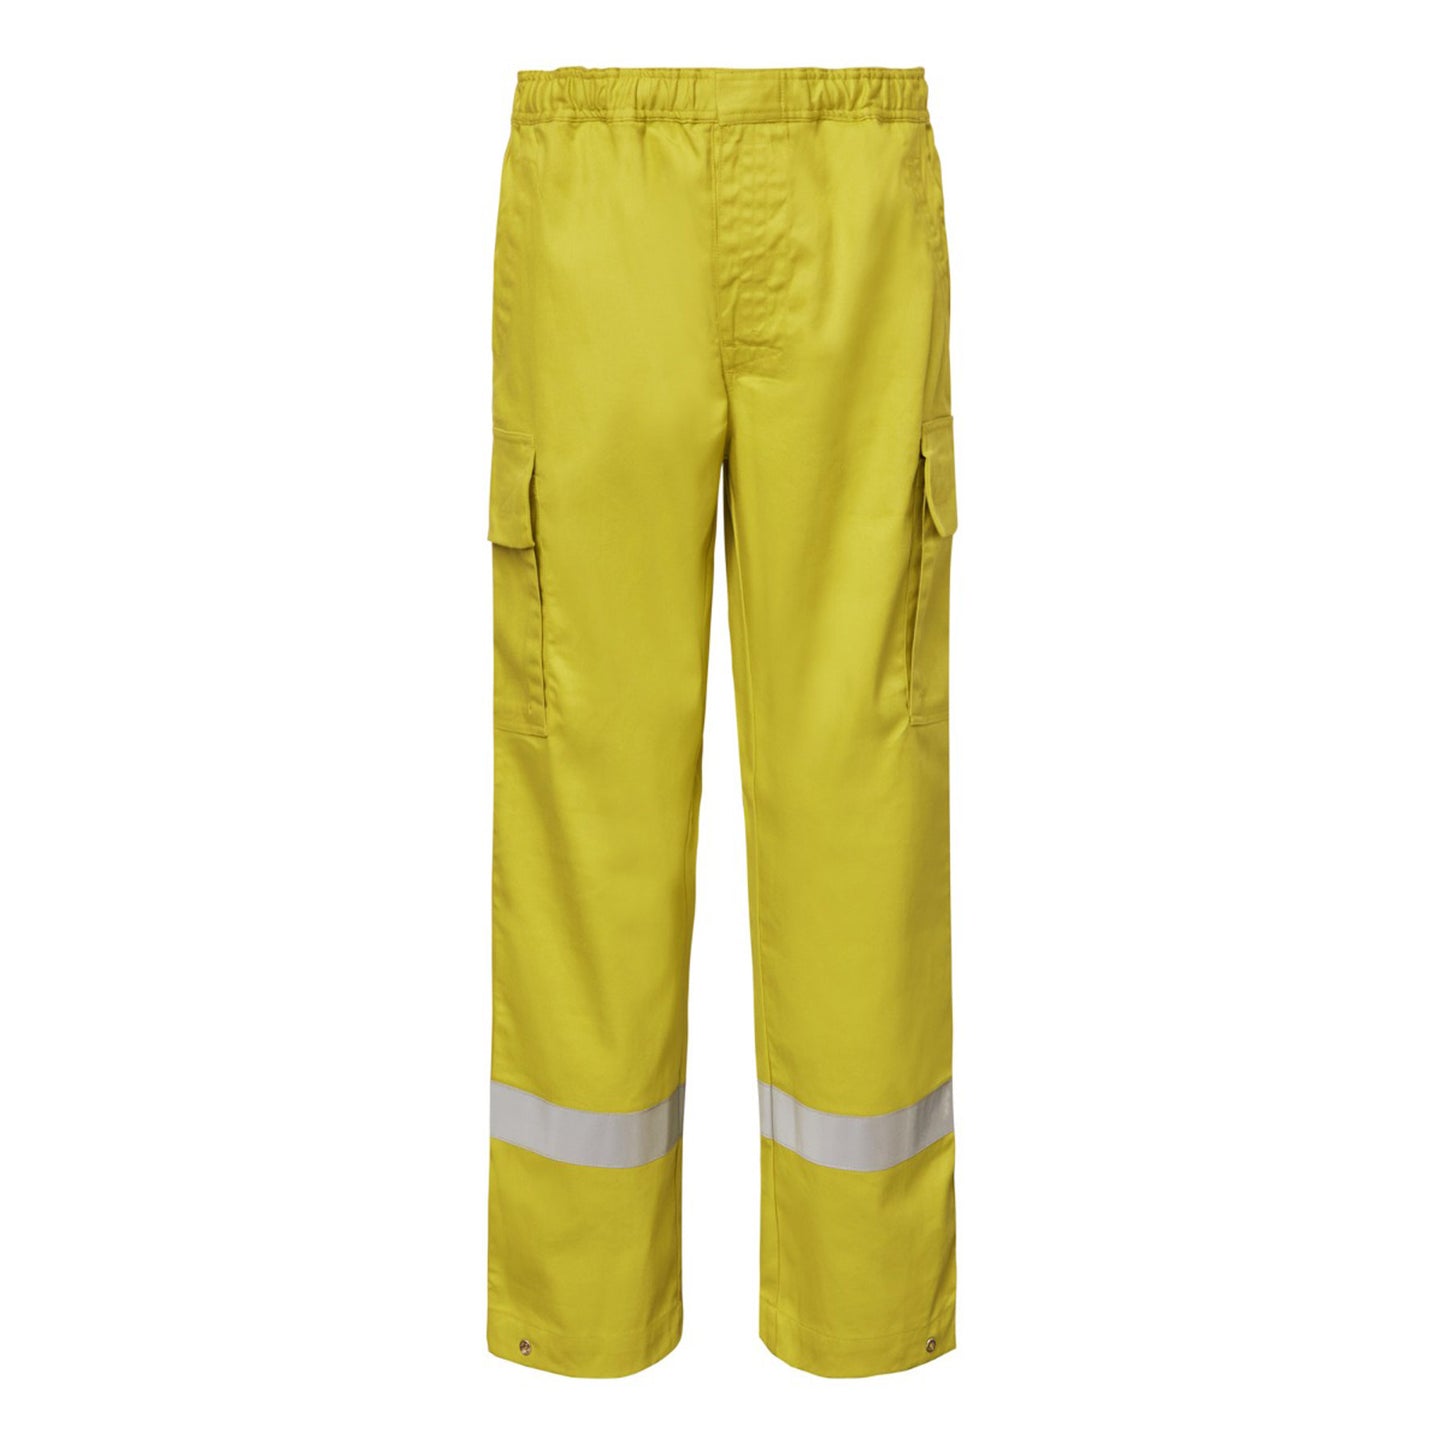 Ranger Reflective Fire Fighting Trousers - made by FlameBuster